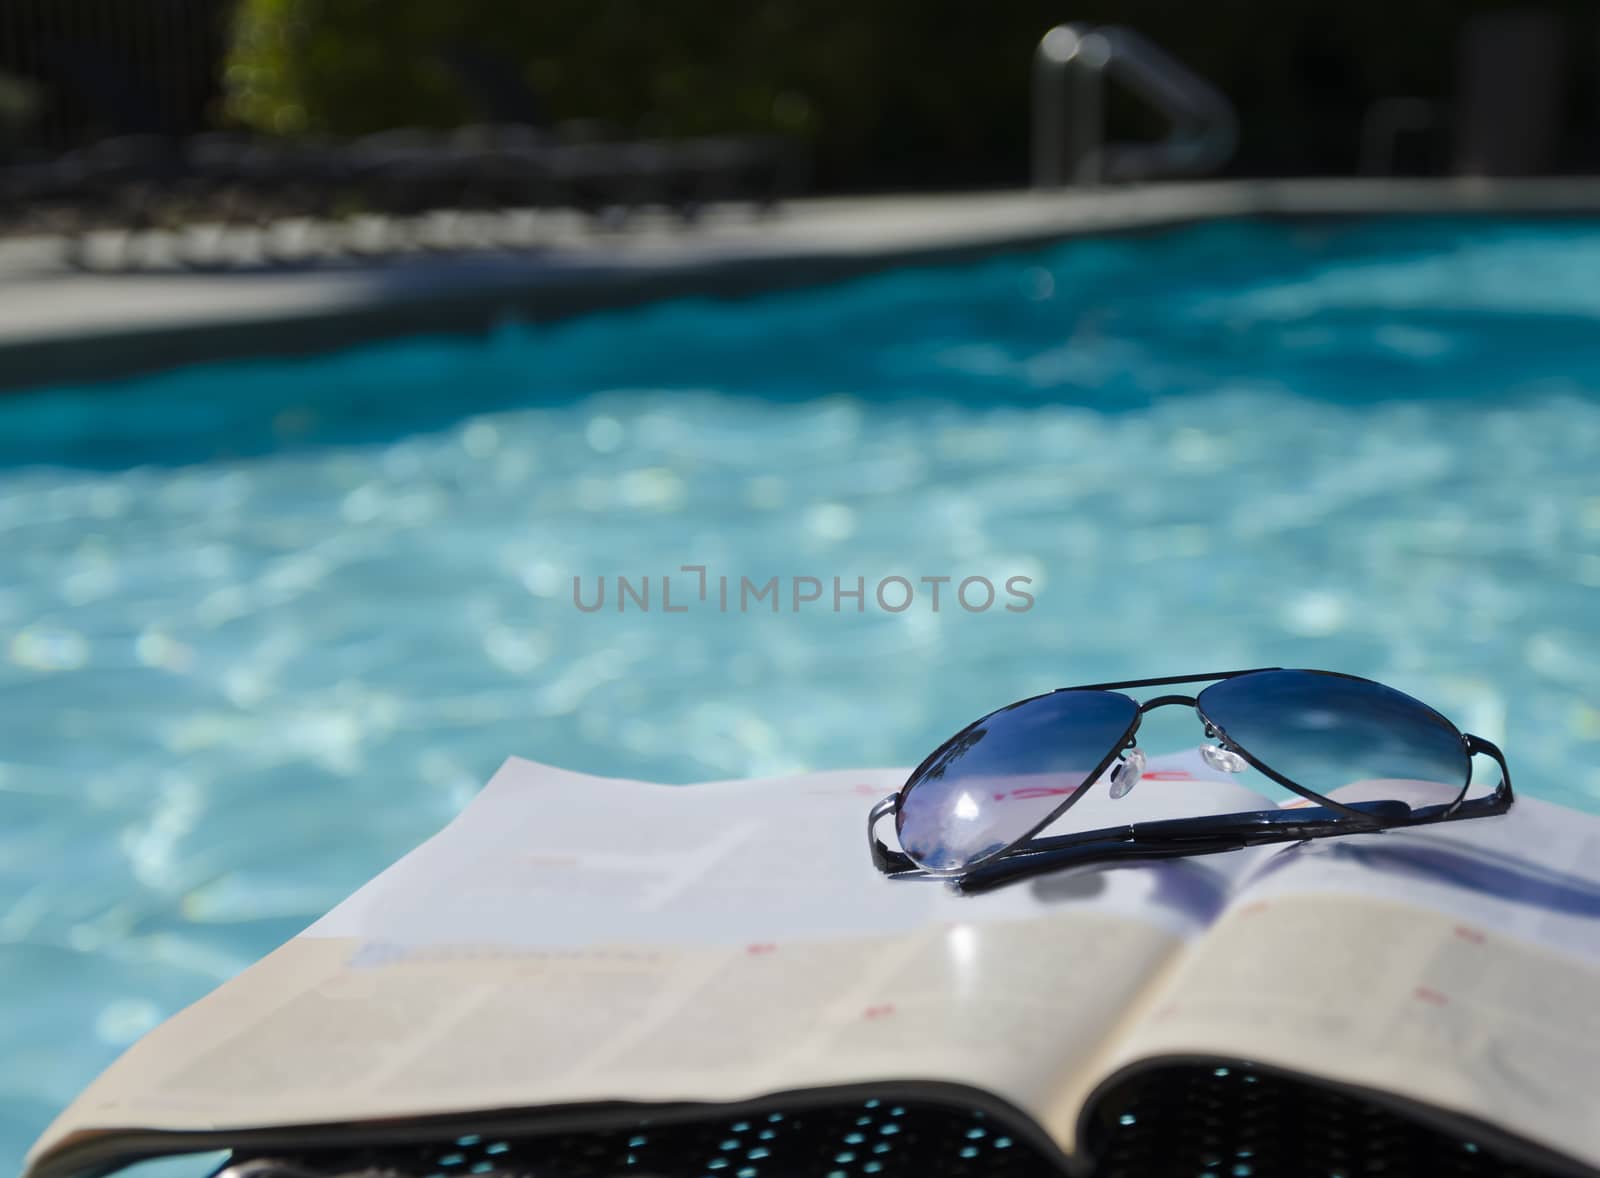 Sunglasses by the pool by EllenSmile